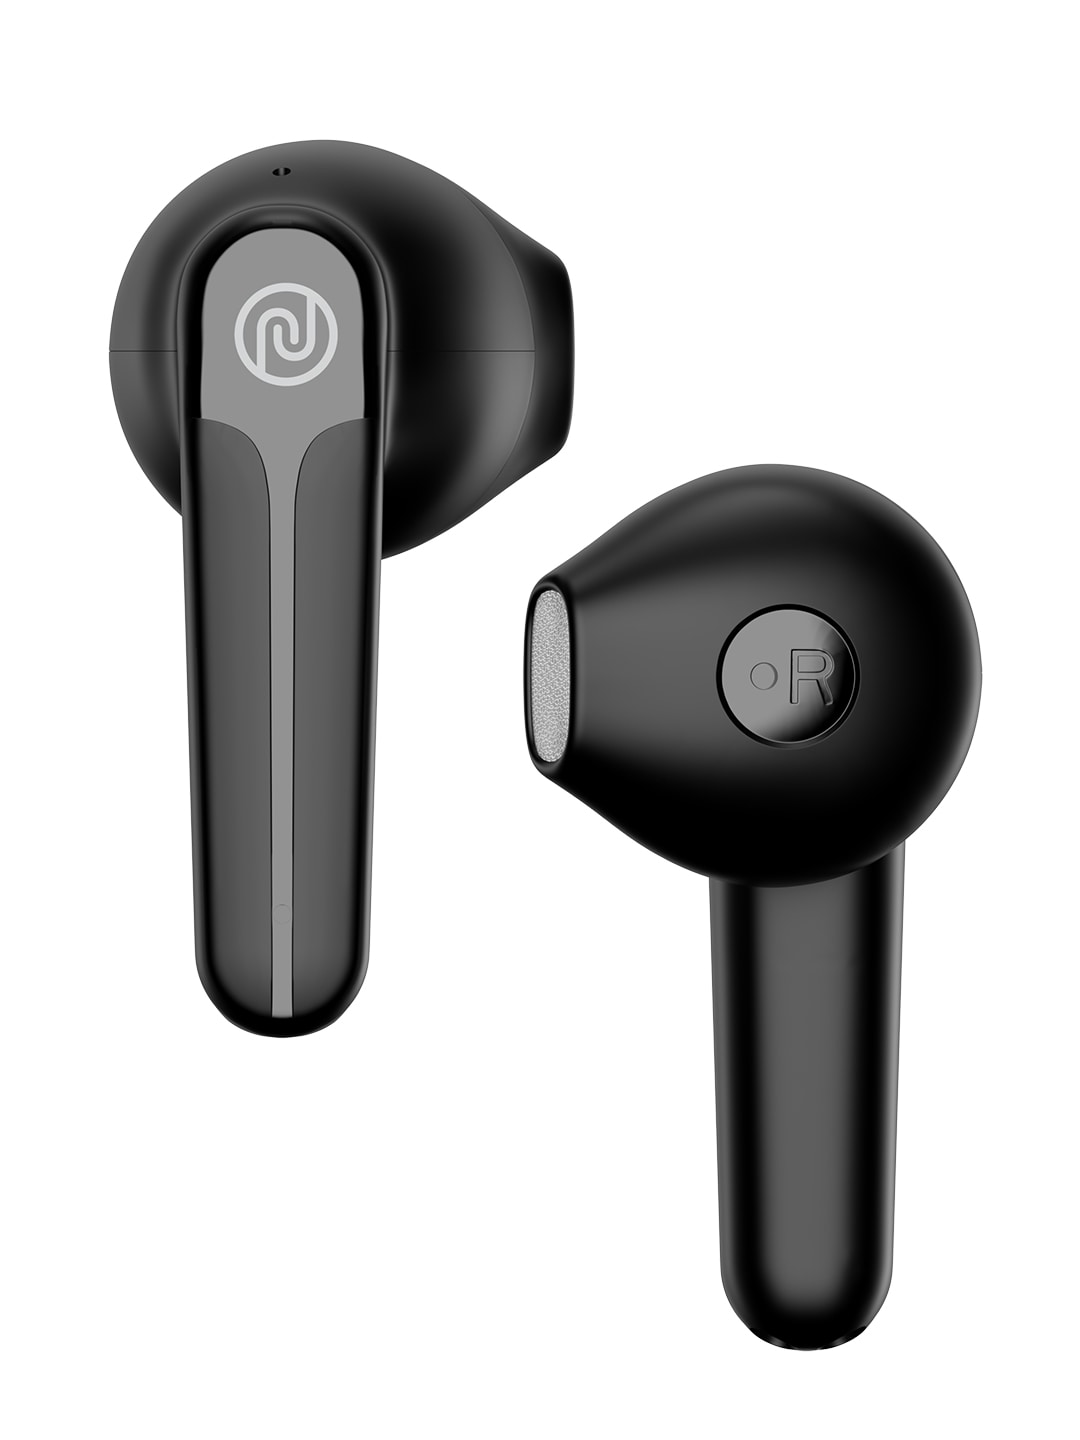 NOISE Buds VS202 Truly Wireless Bluetooth Earbuds - Charcoal Black Price in India